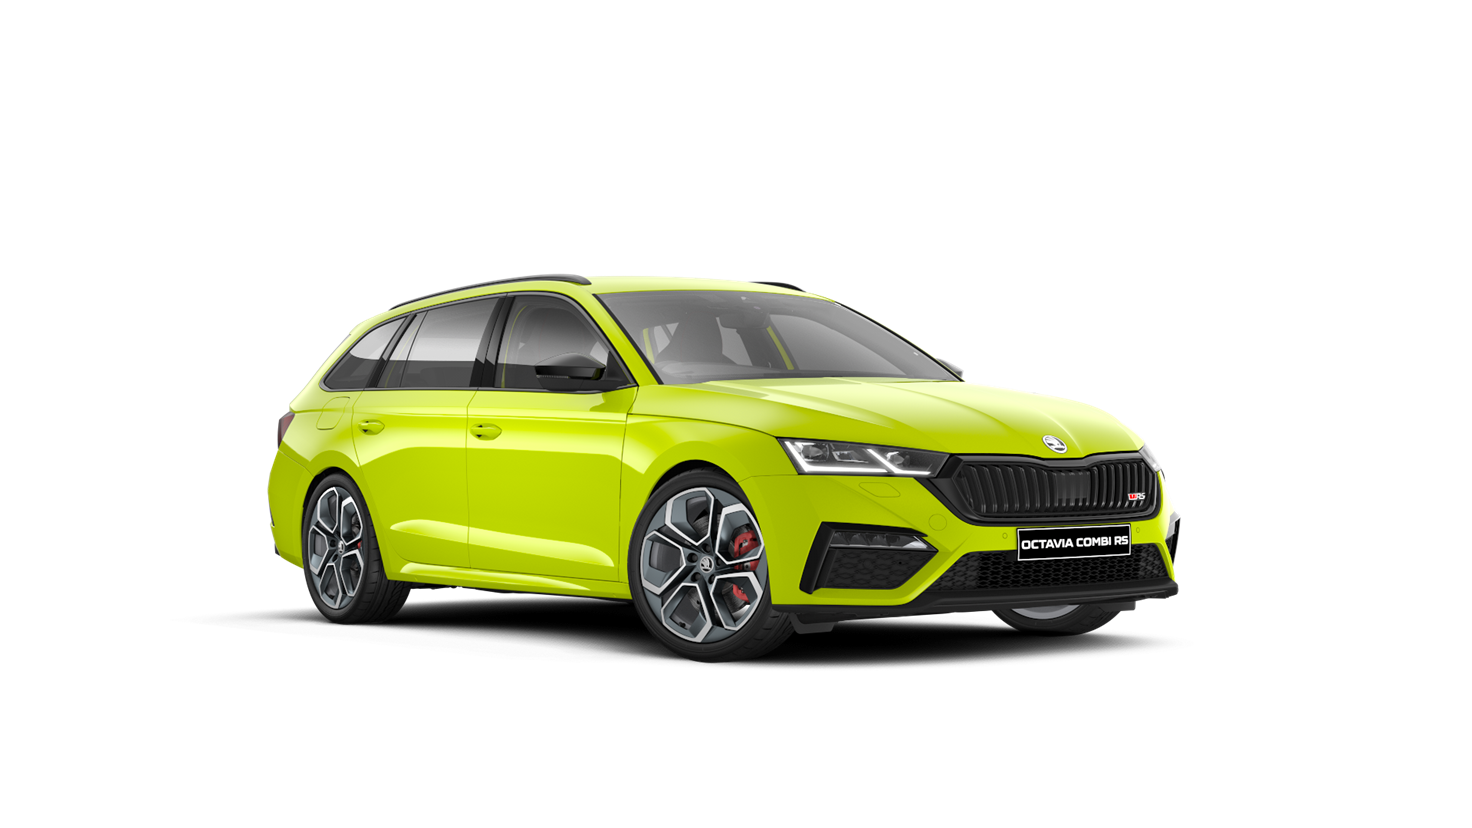 2021 Skoda Octavia RS 245 Subjected to Acceleration Test on the